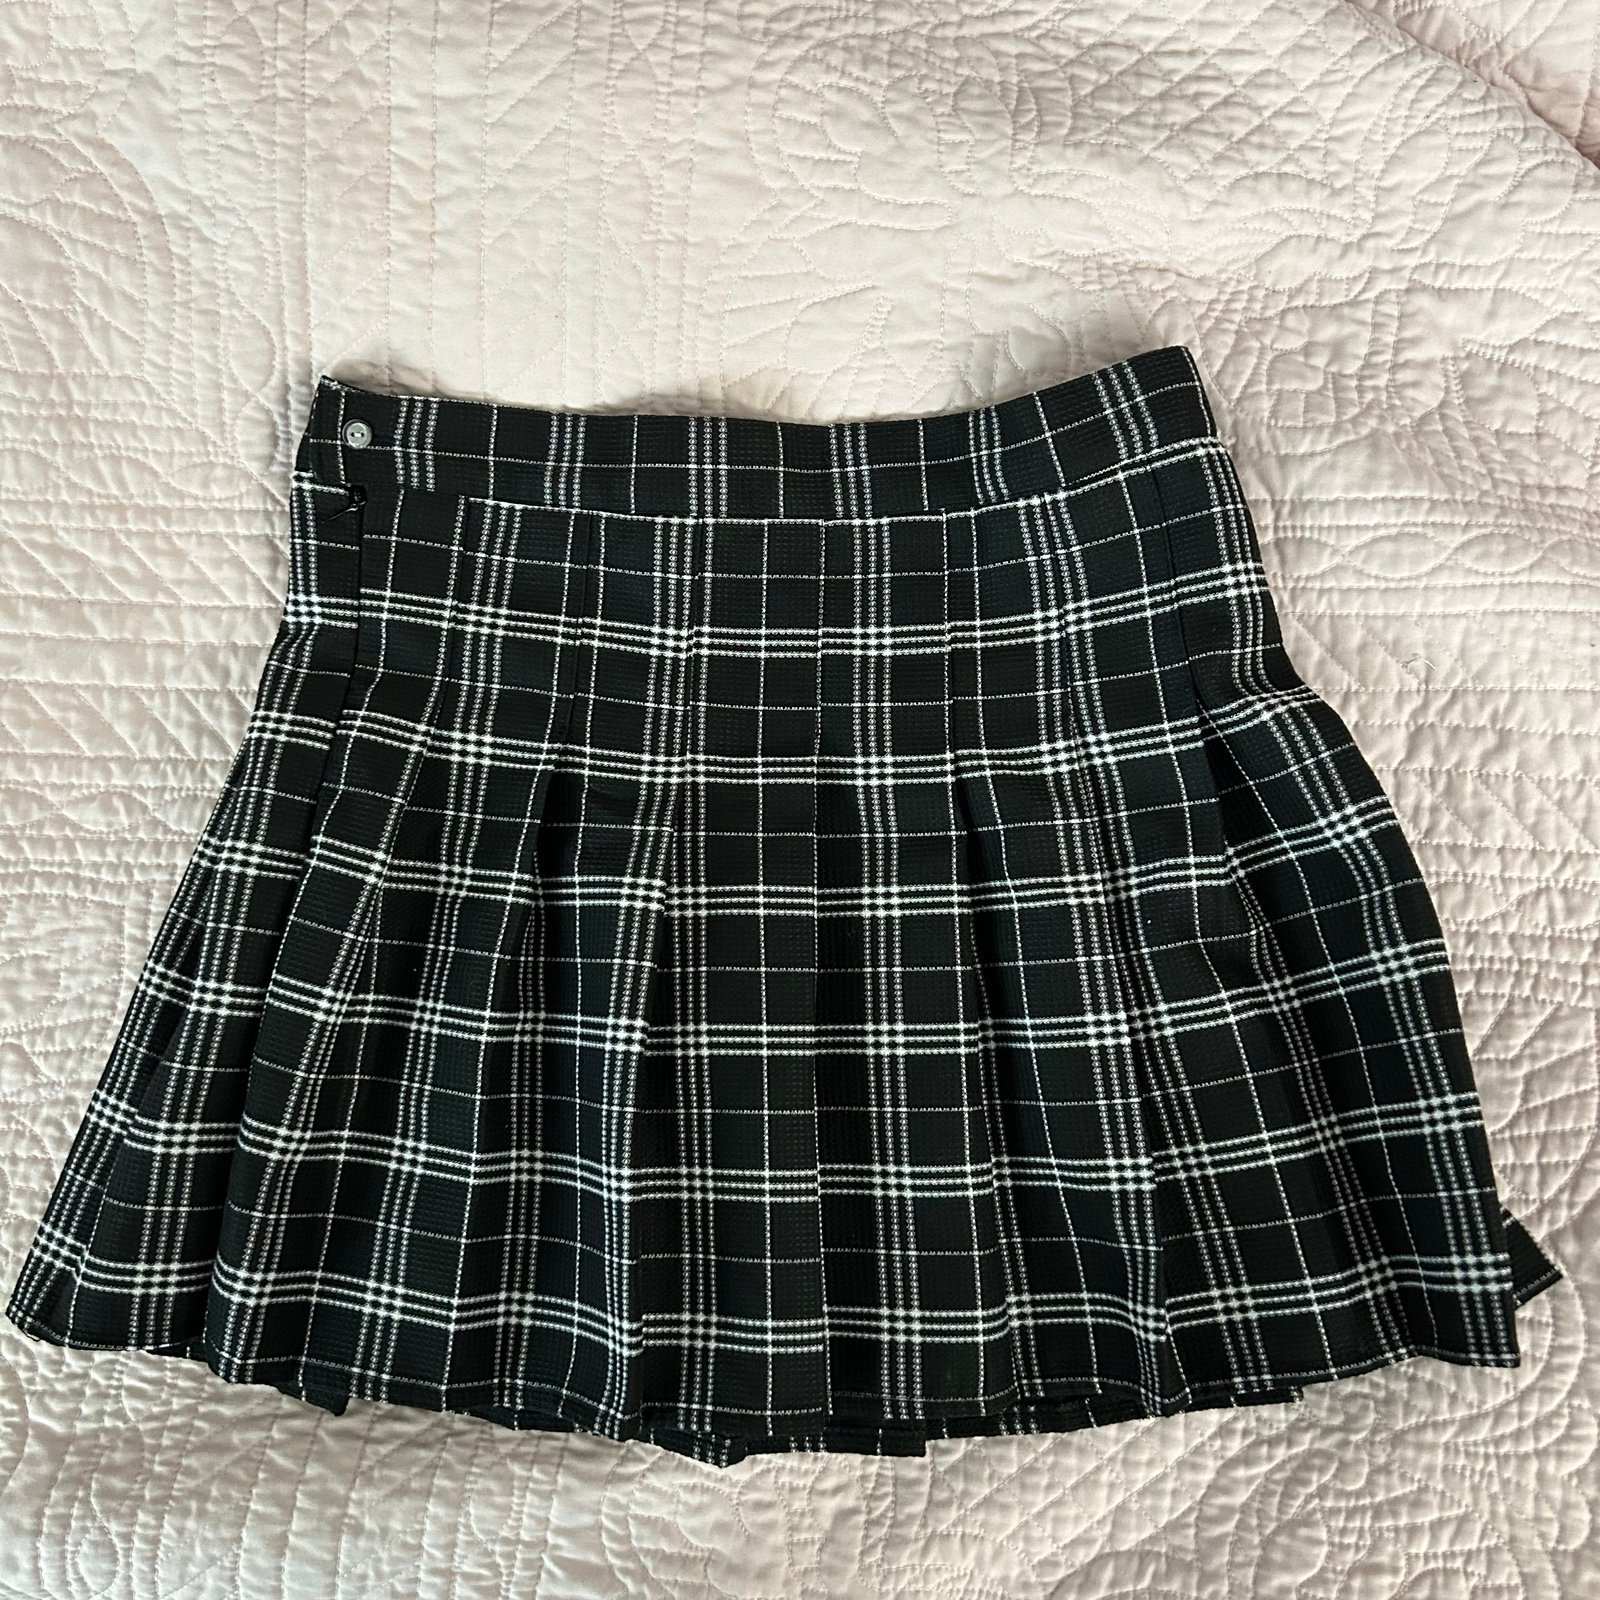 cheapest place to buy  Black and white pleated circle skirt jgxpDwFtS Wholesale